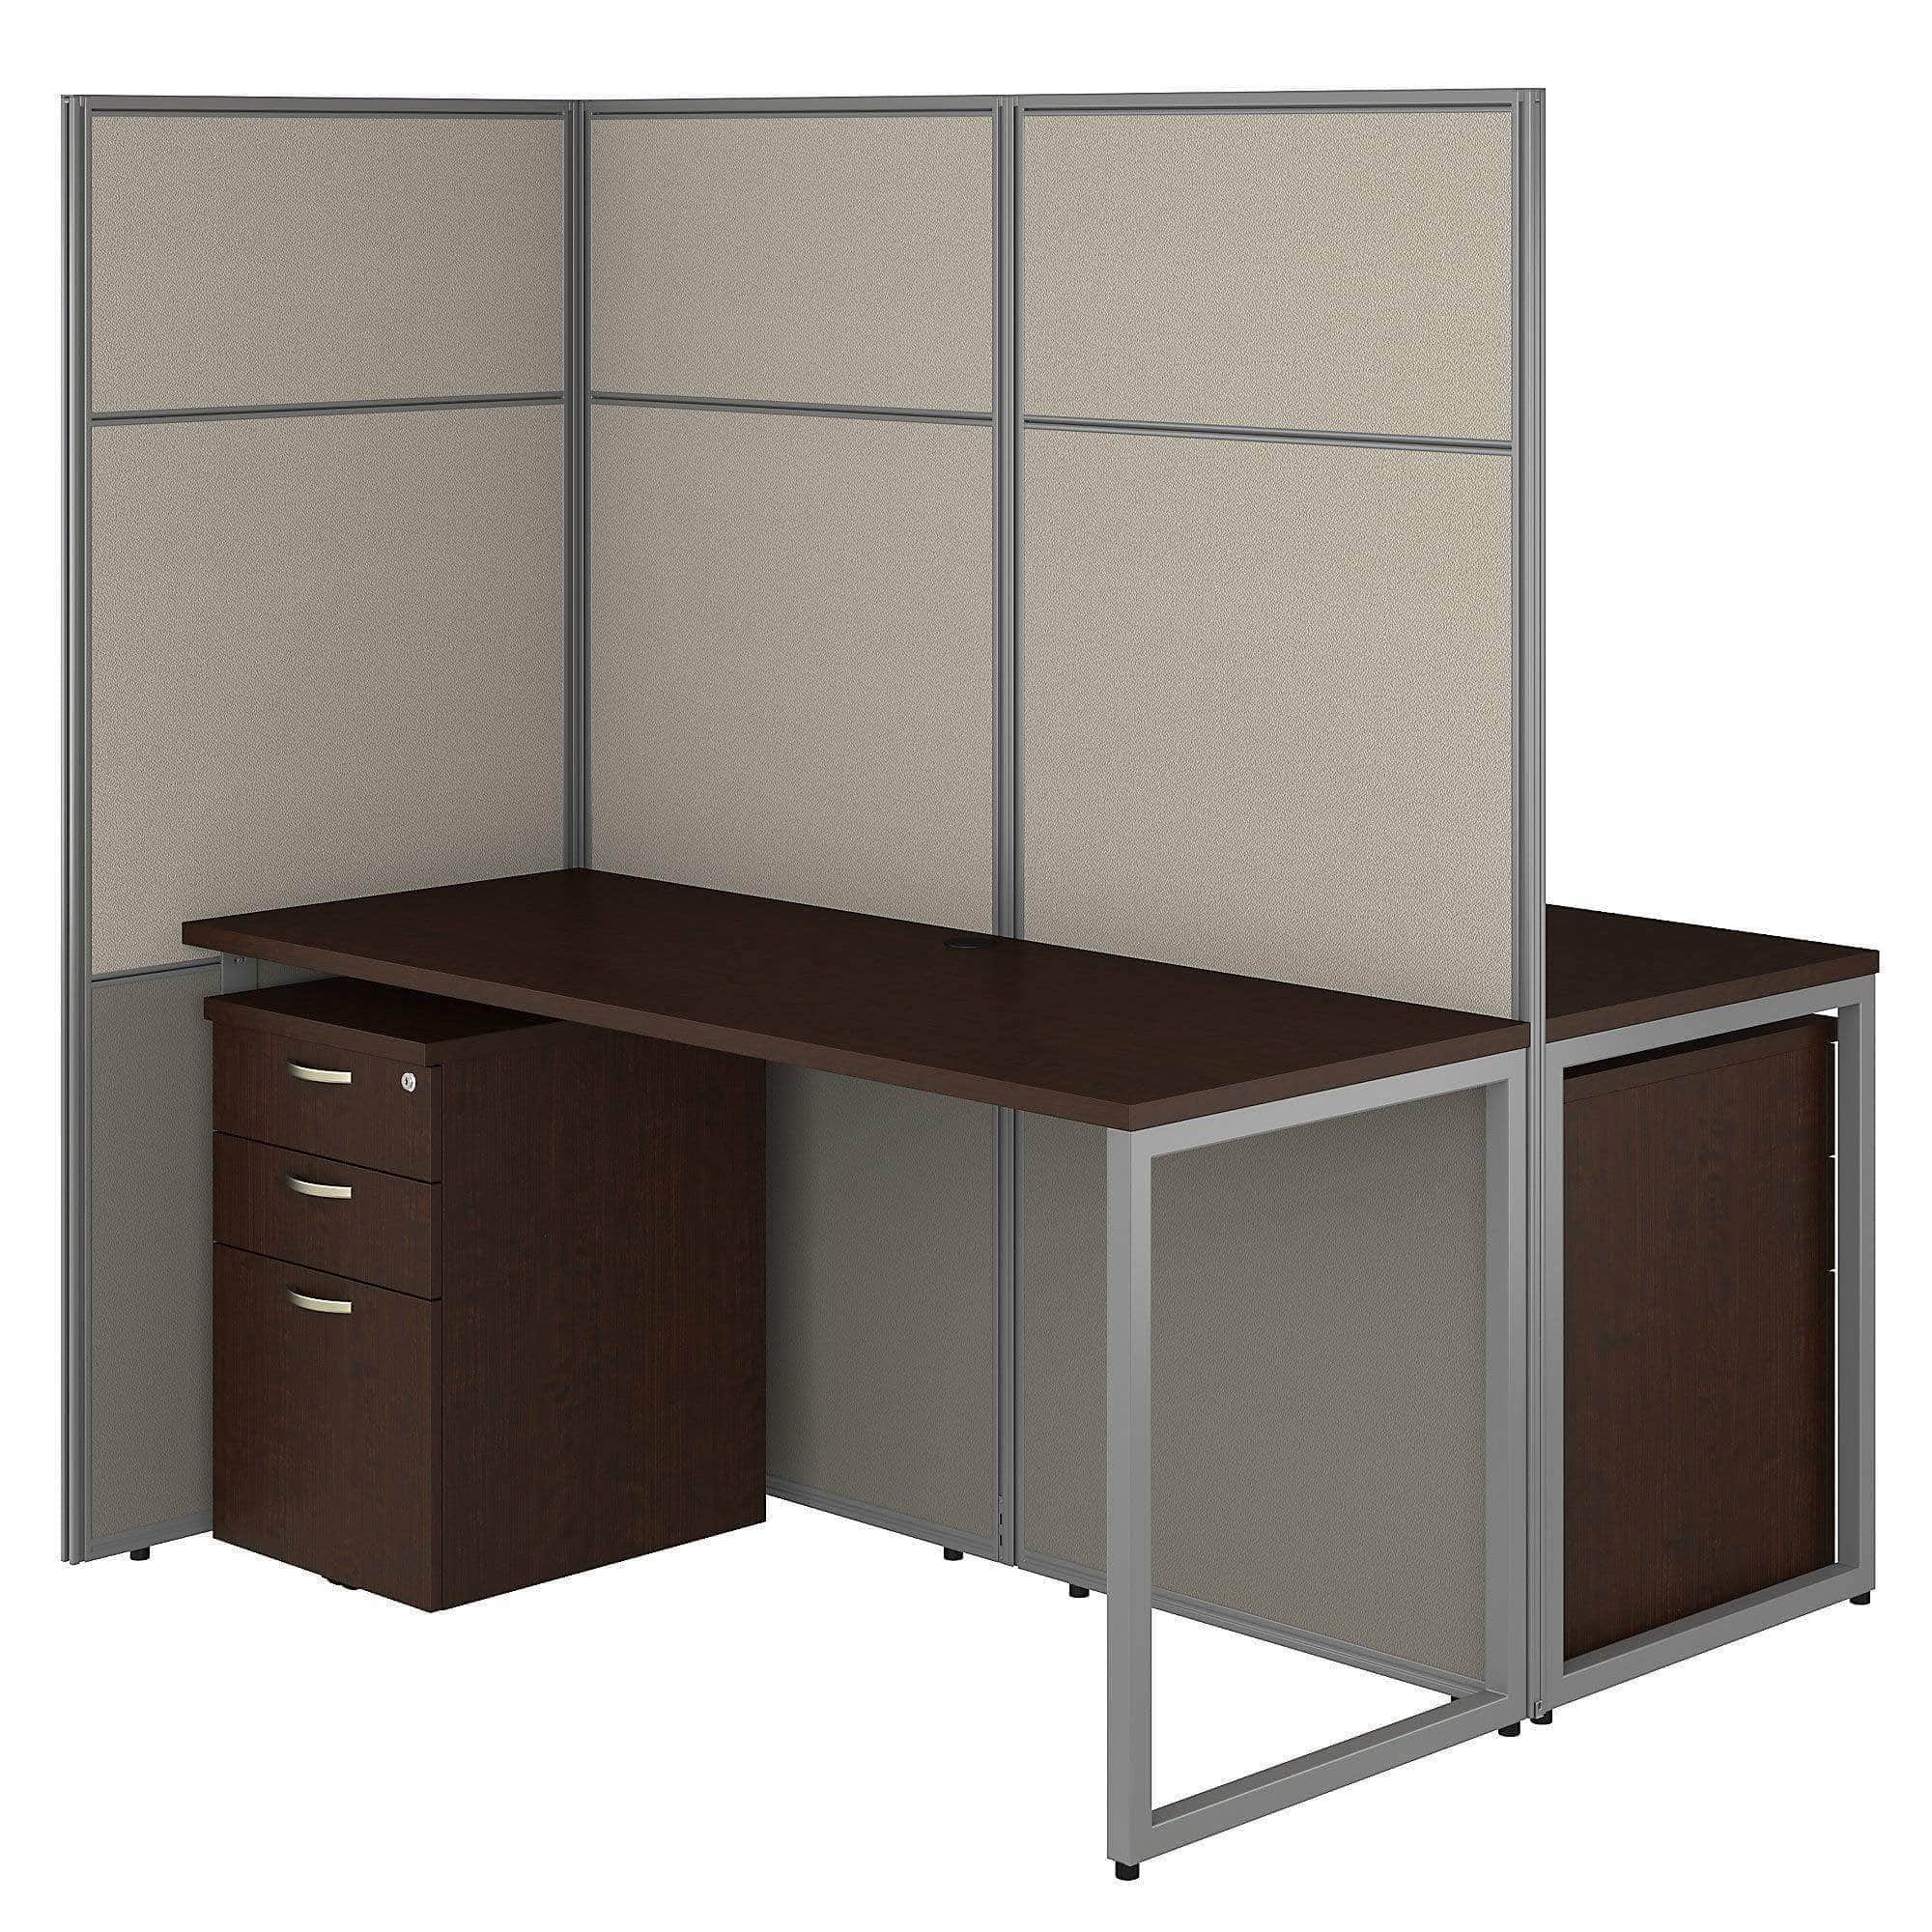 Organize with bush business furniture eodh46smr 03k easy office 2 person cubicle desk with file cabinets and 66h panels 60wx60h mocha cherry